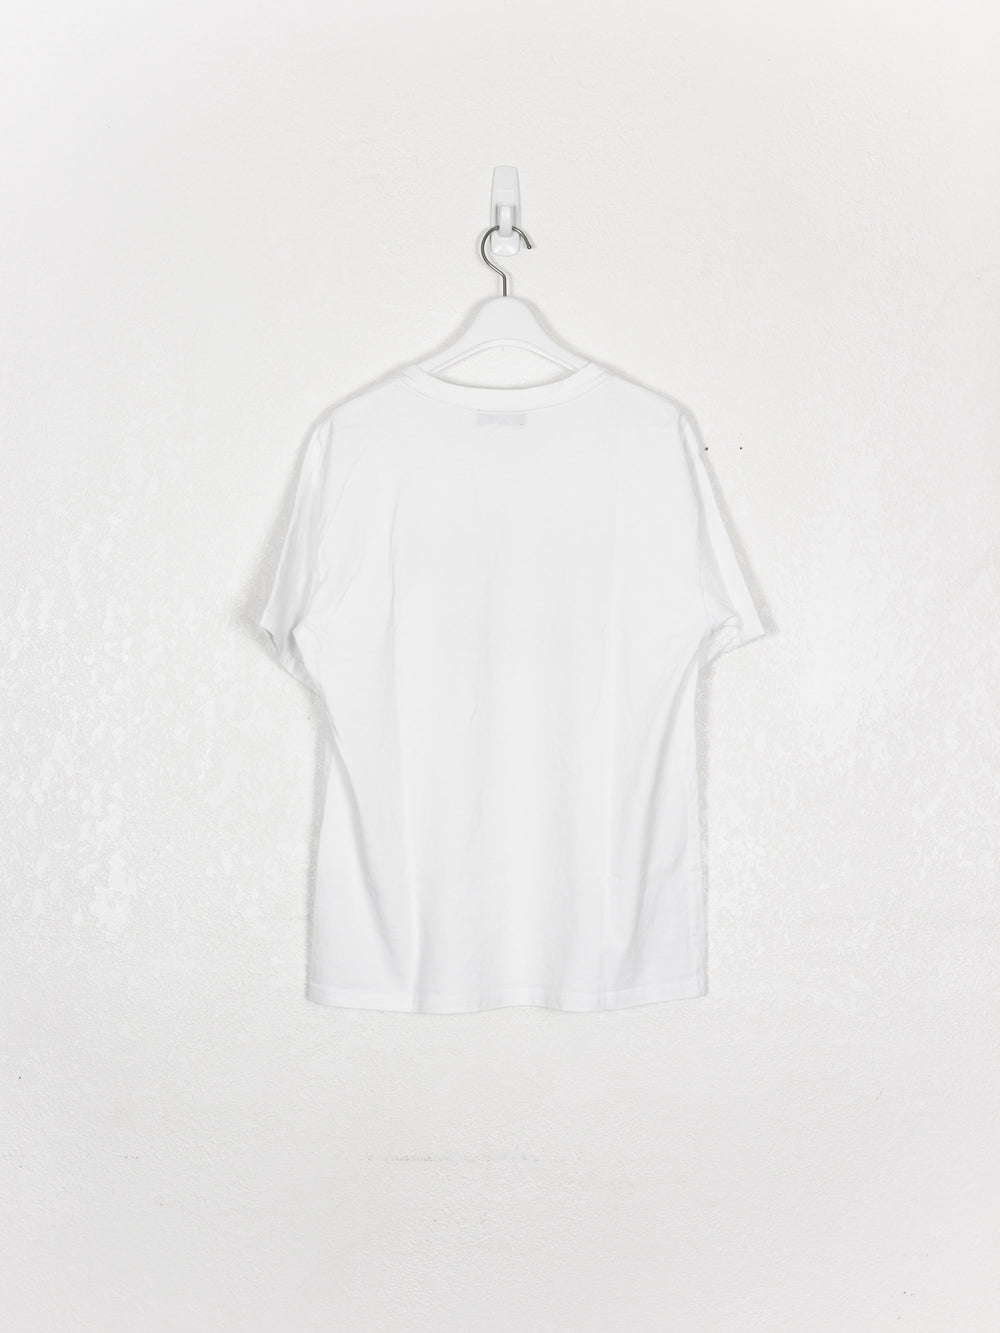 Undercover SS14 Psychocandy You Trip Me Up Tee